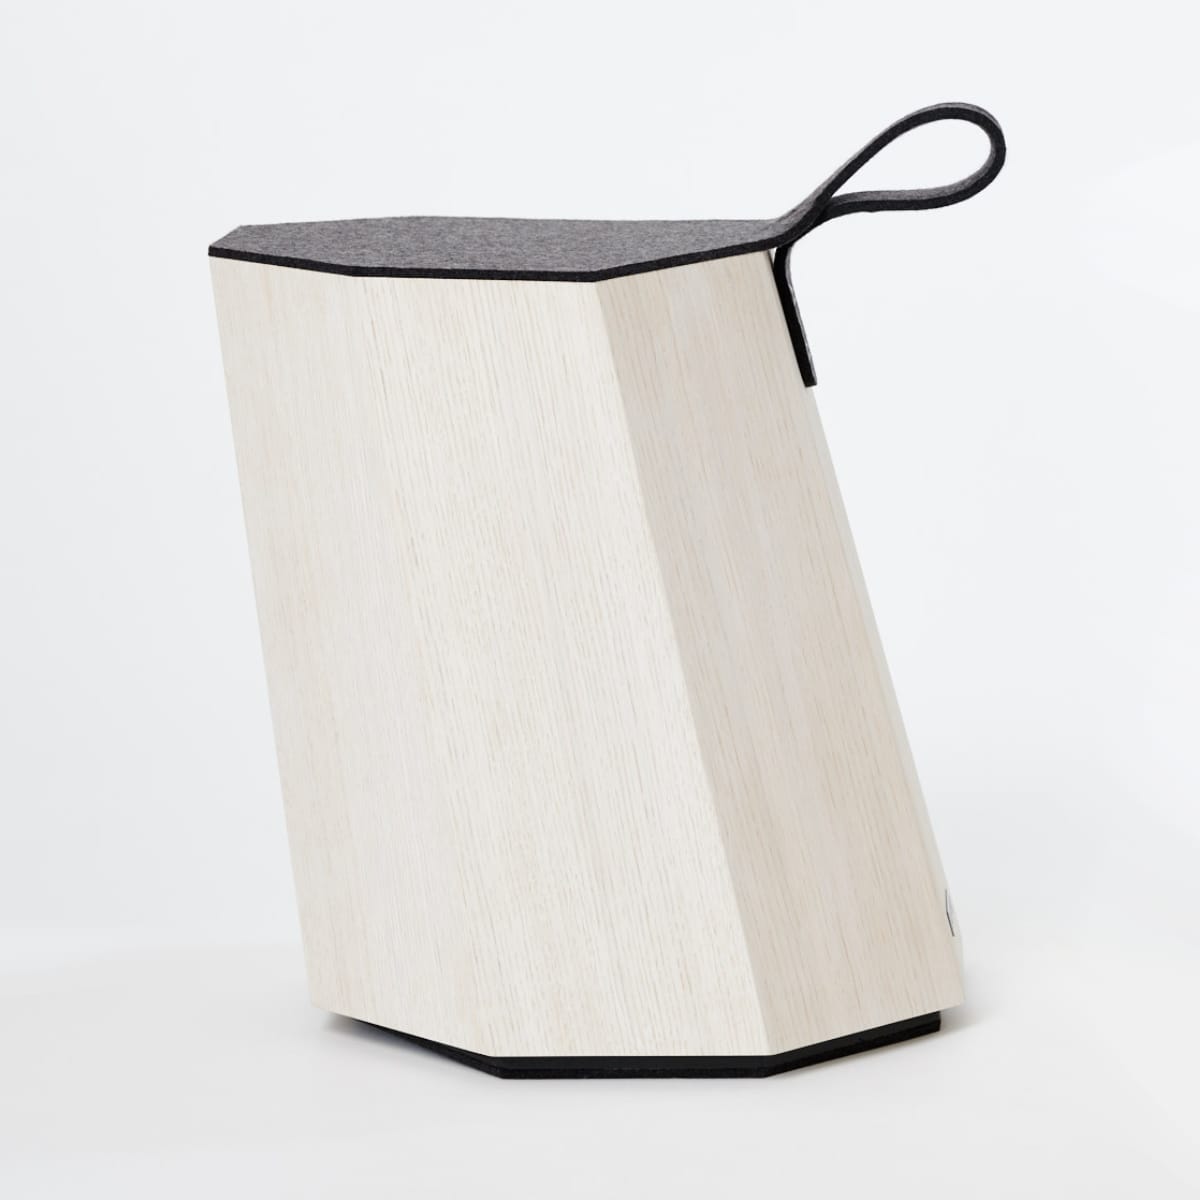 8 Stool with octagonal base shape oblique extruded made of light wood covered with felt surface and handle and dark base